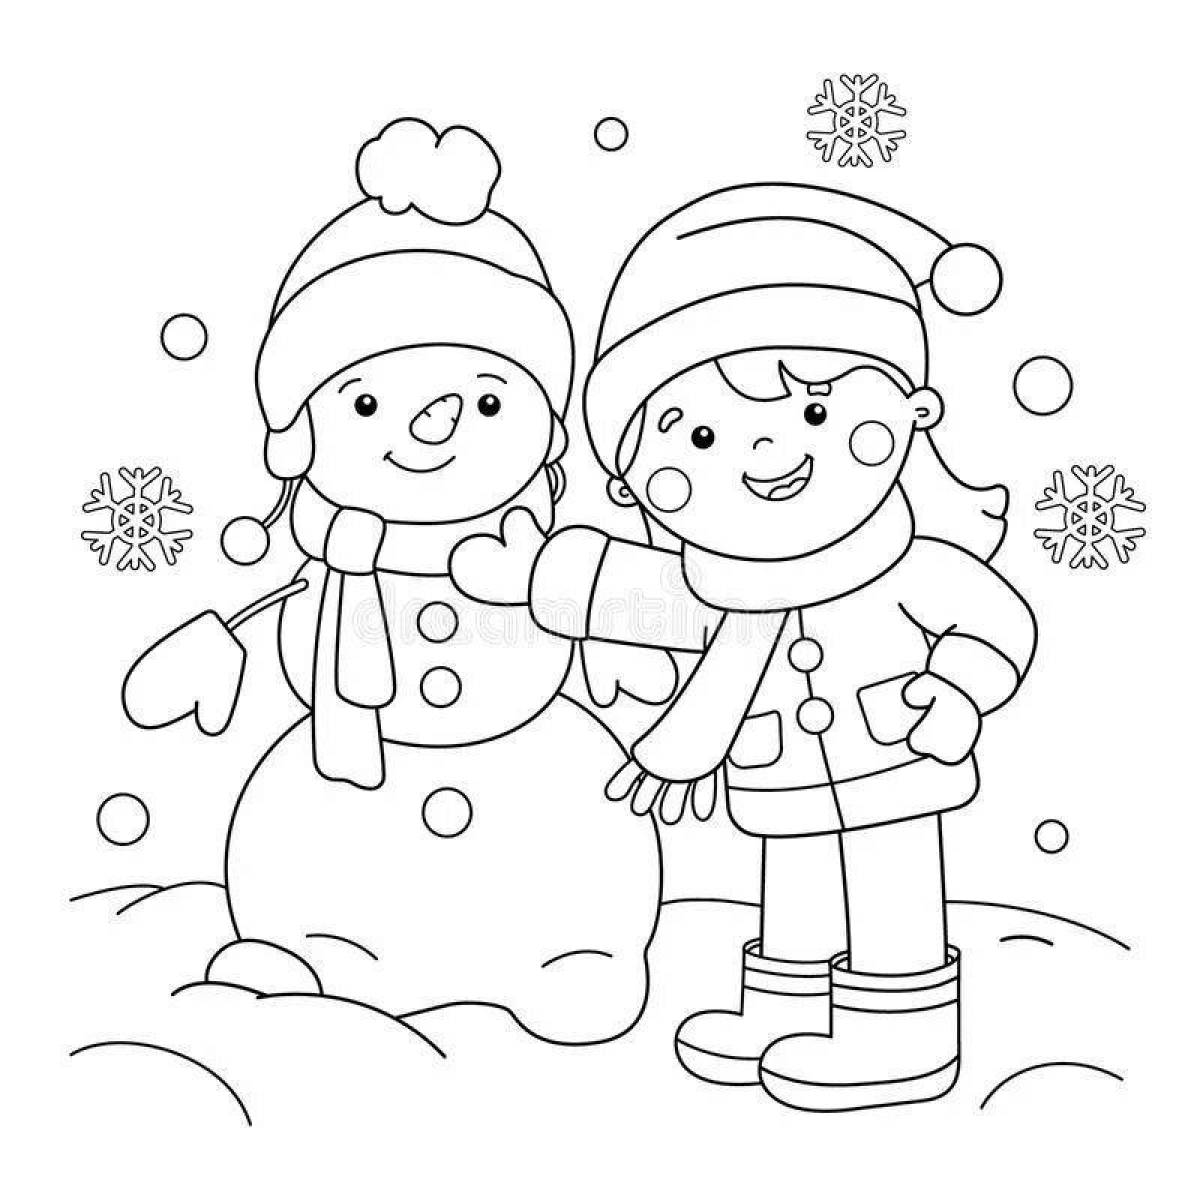 Large coloring book of children walking in winter